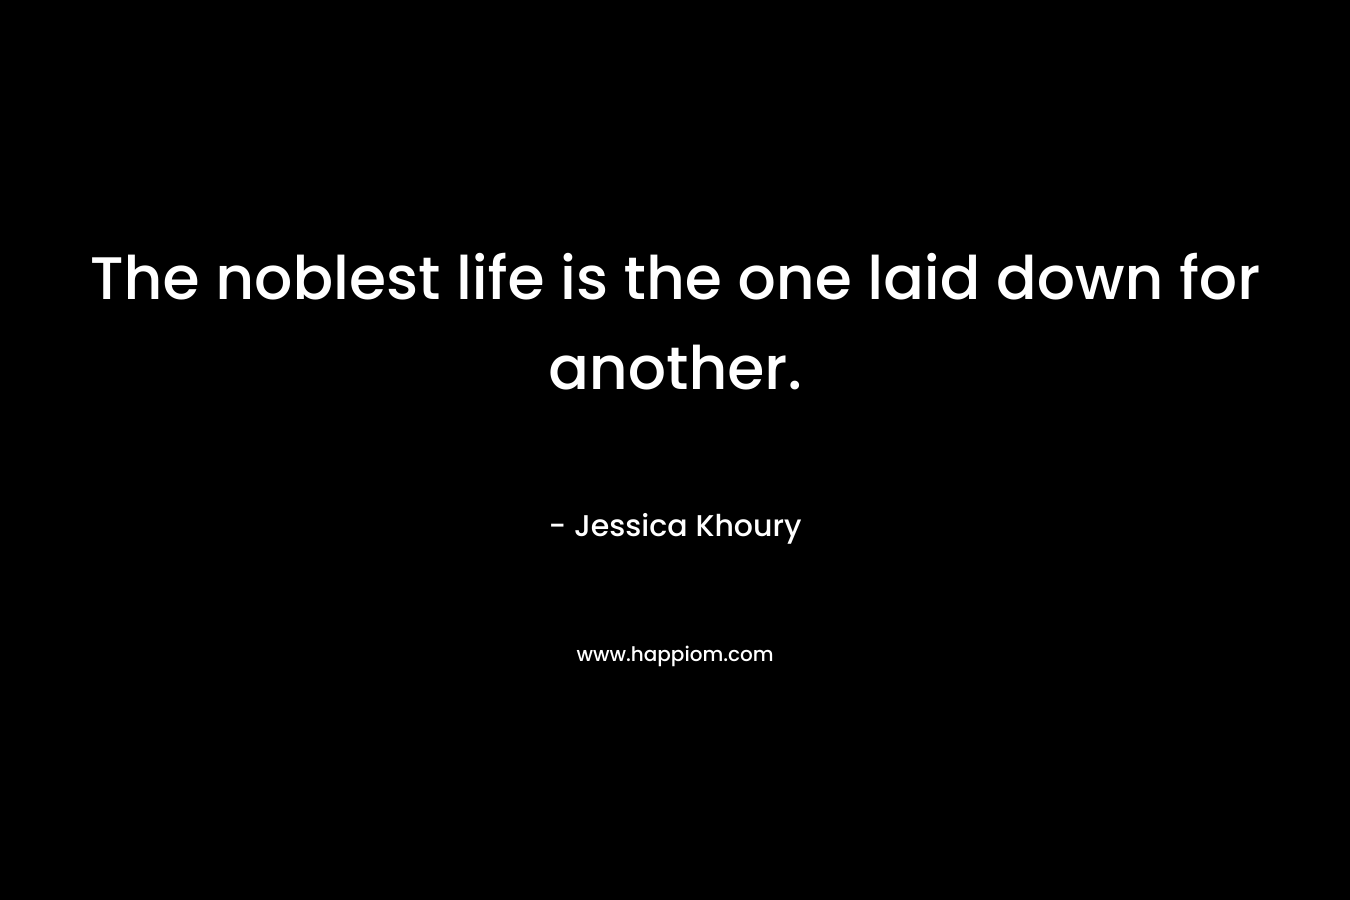 The noblest life is the one laid down for another.